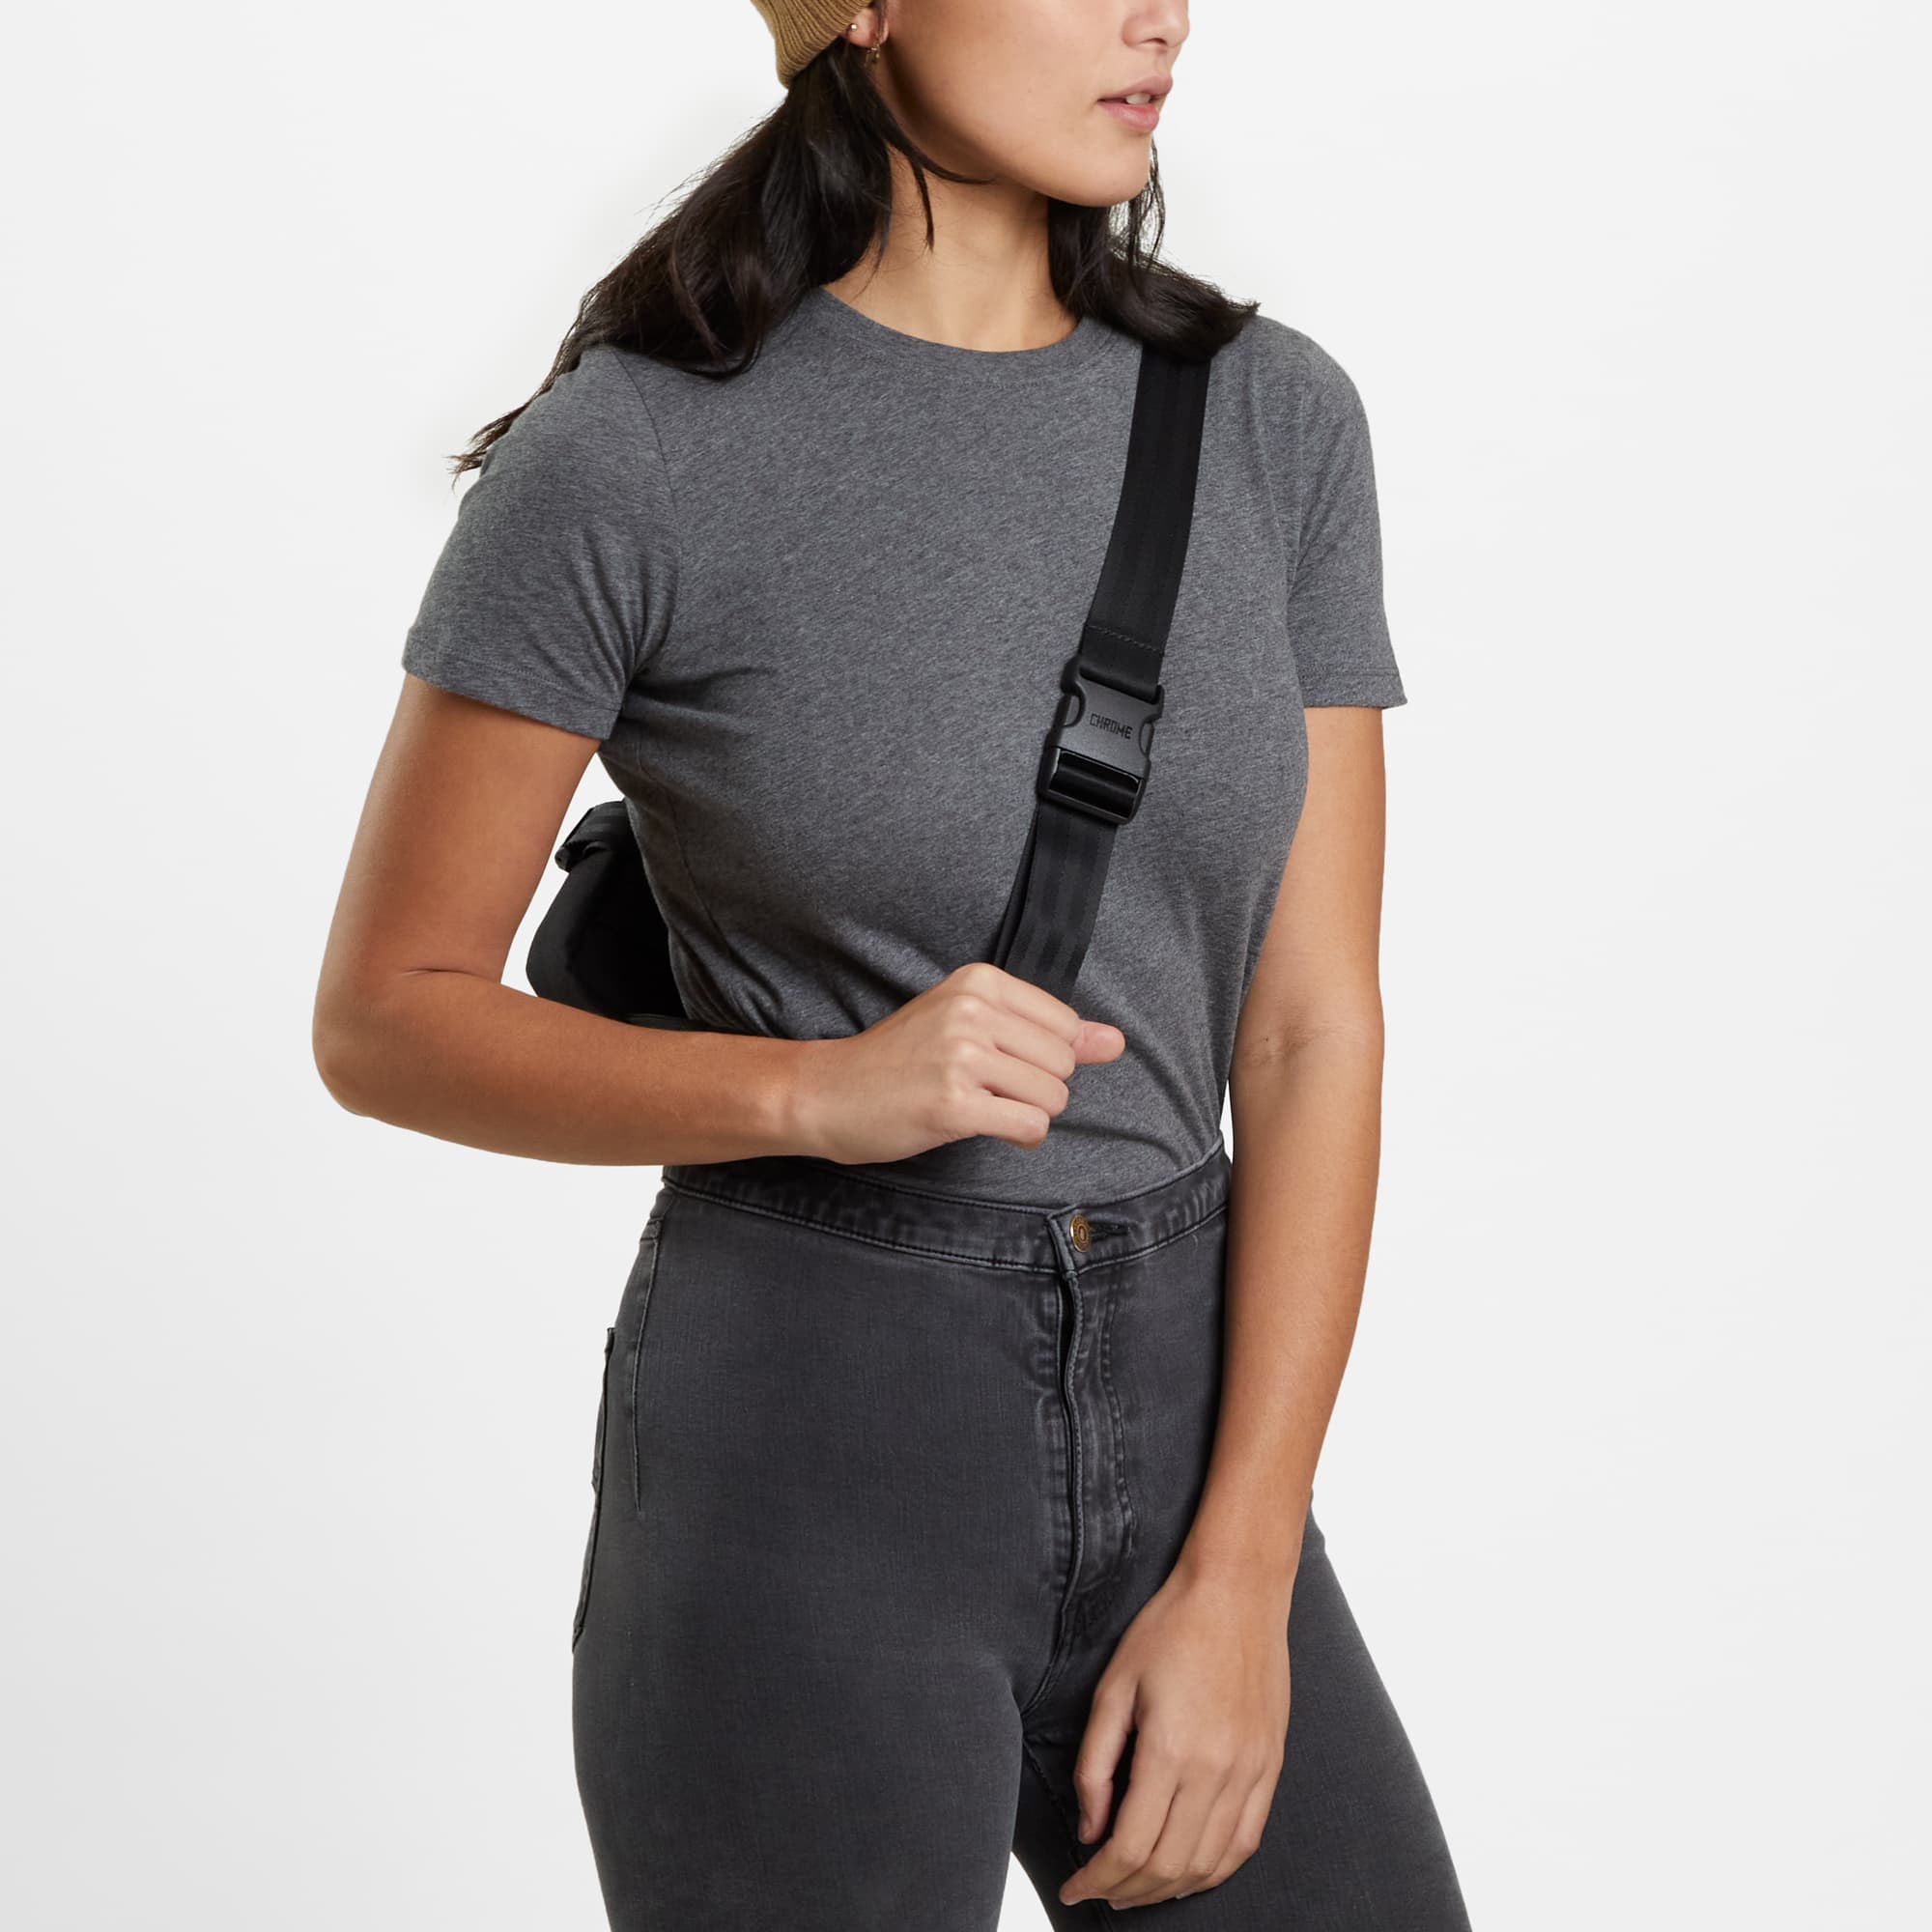 Medium size frame bag worn as a sling front view